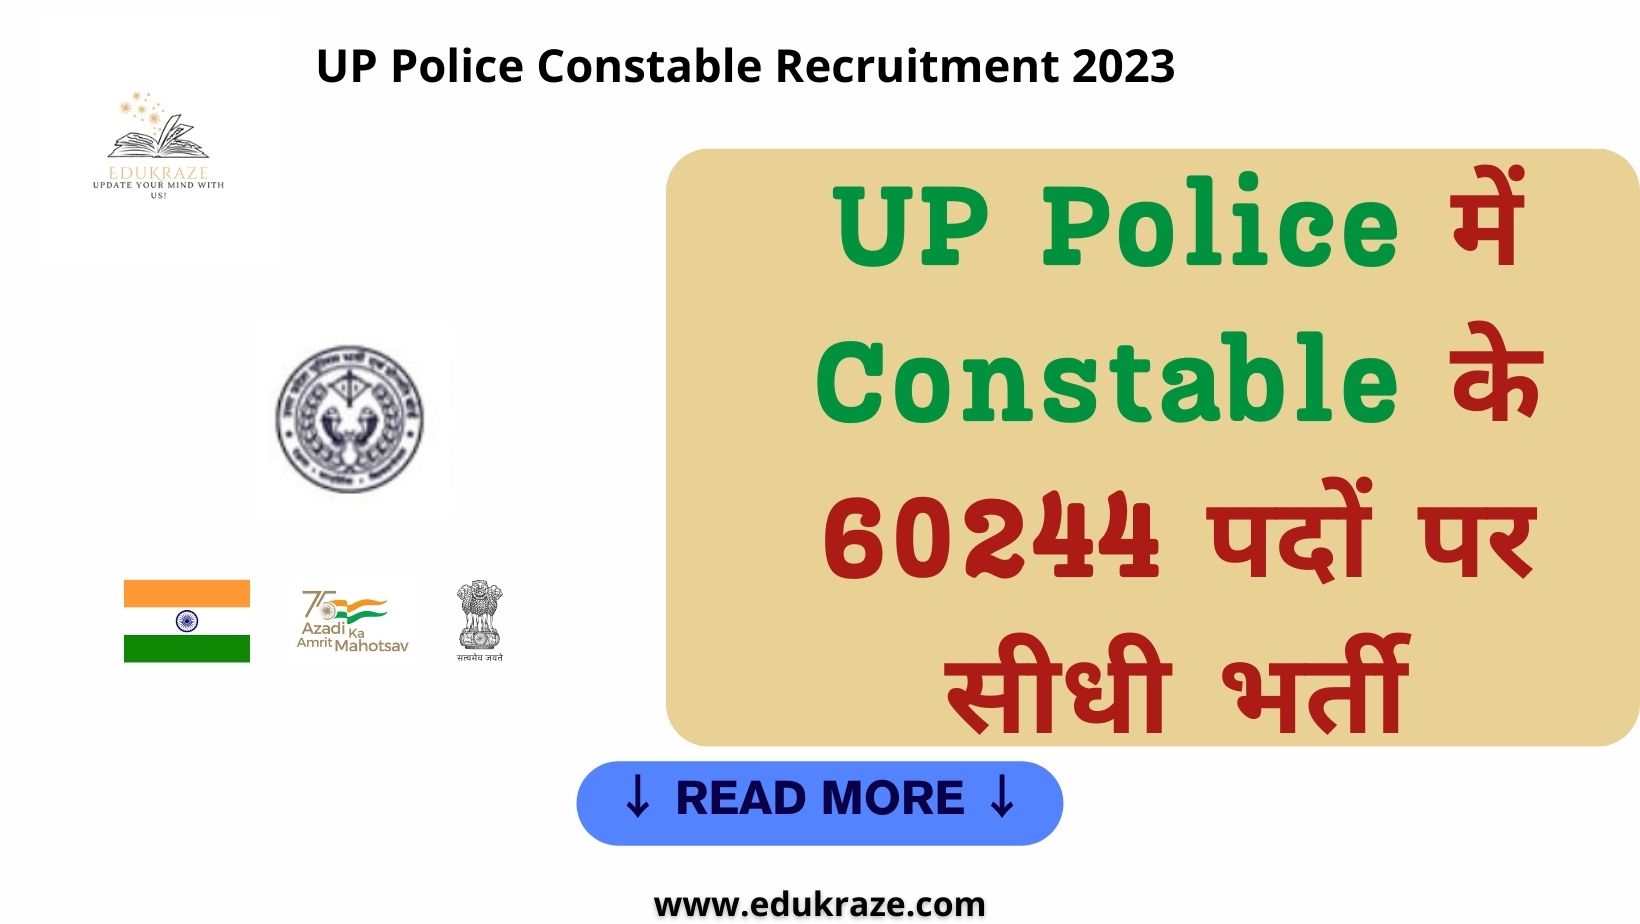 UP Police Constable Recruitment 2023 Out for 60244 Male/Female Posts